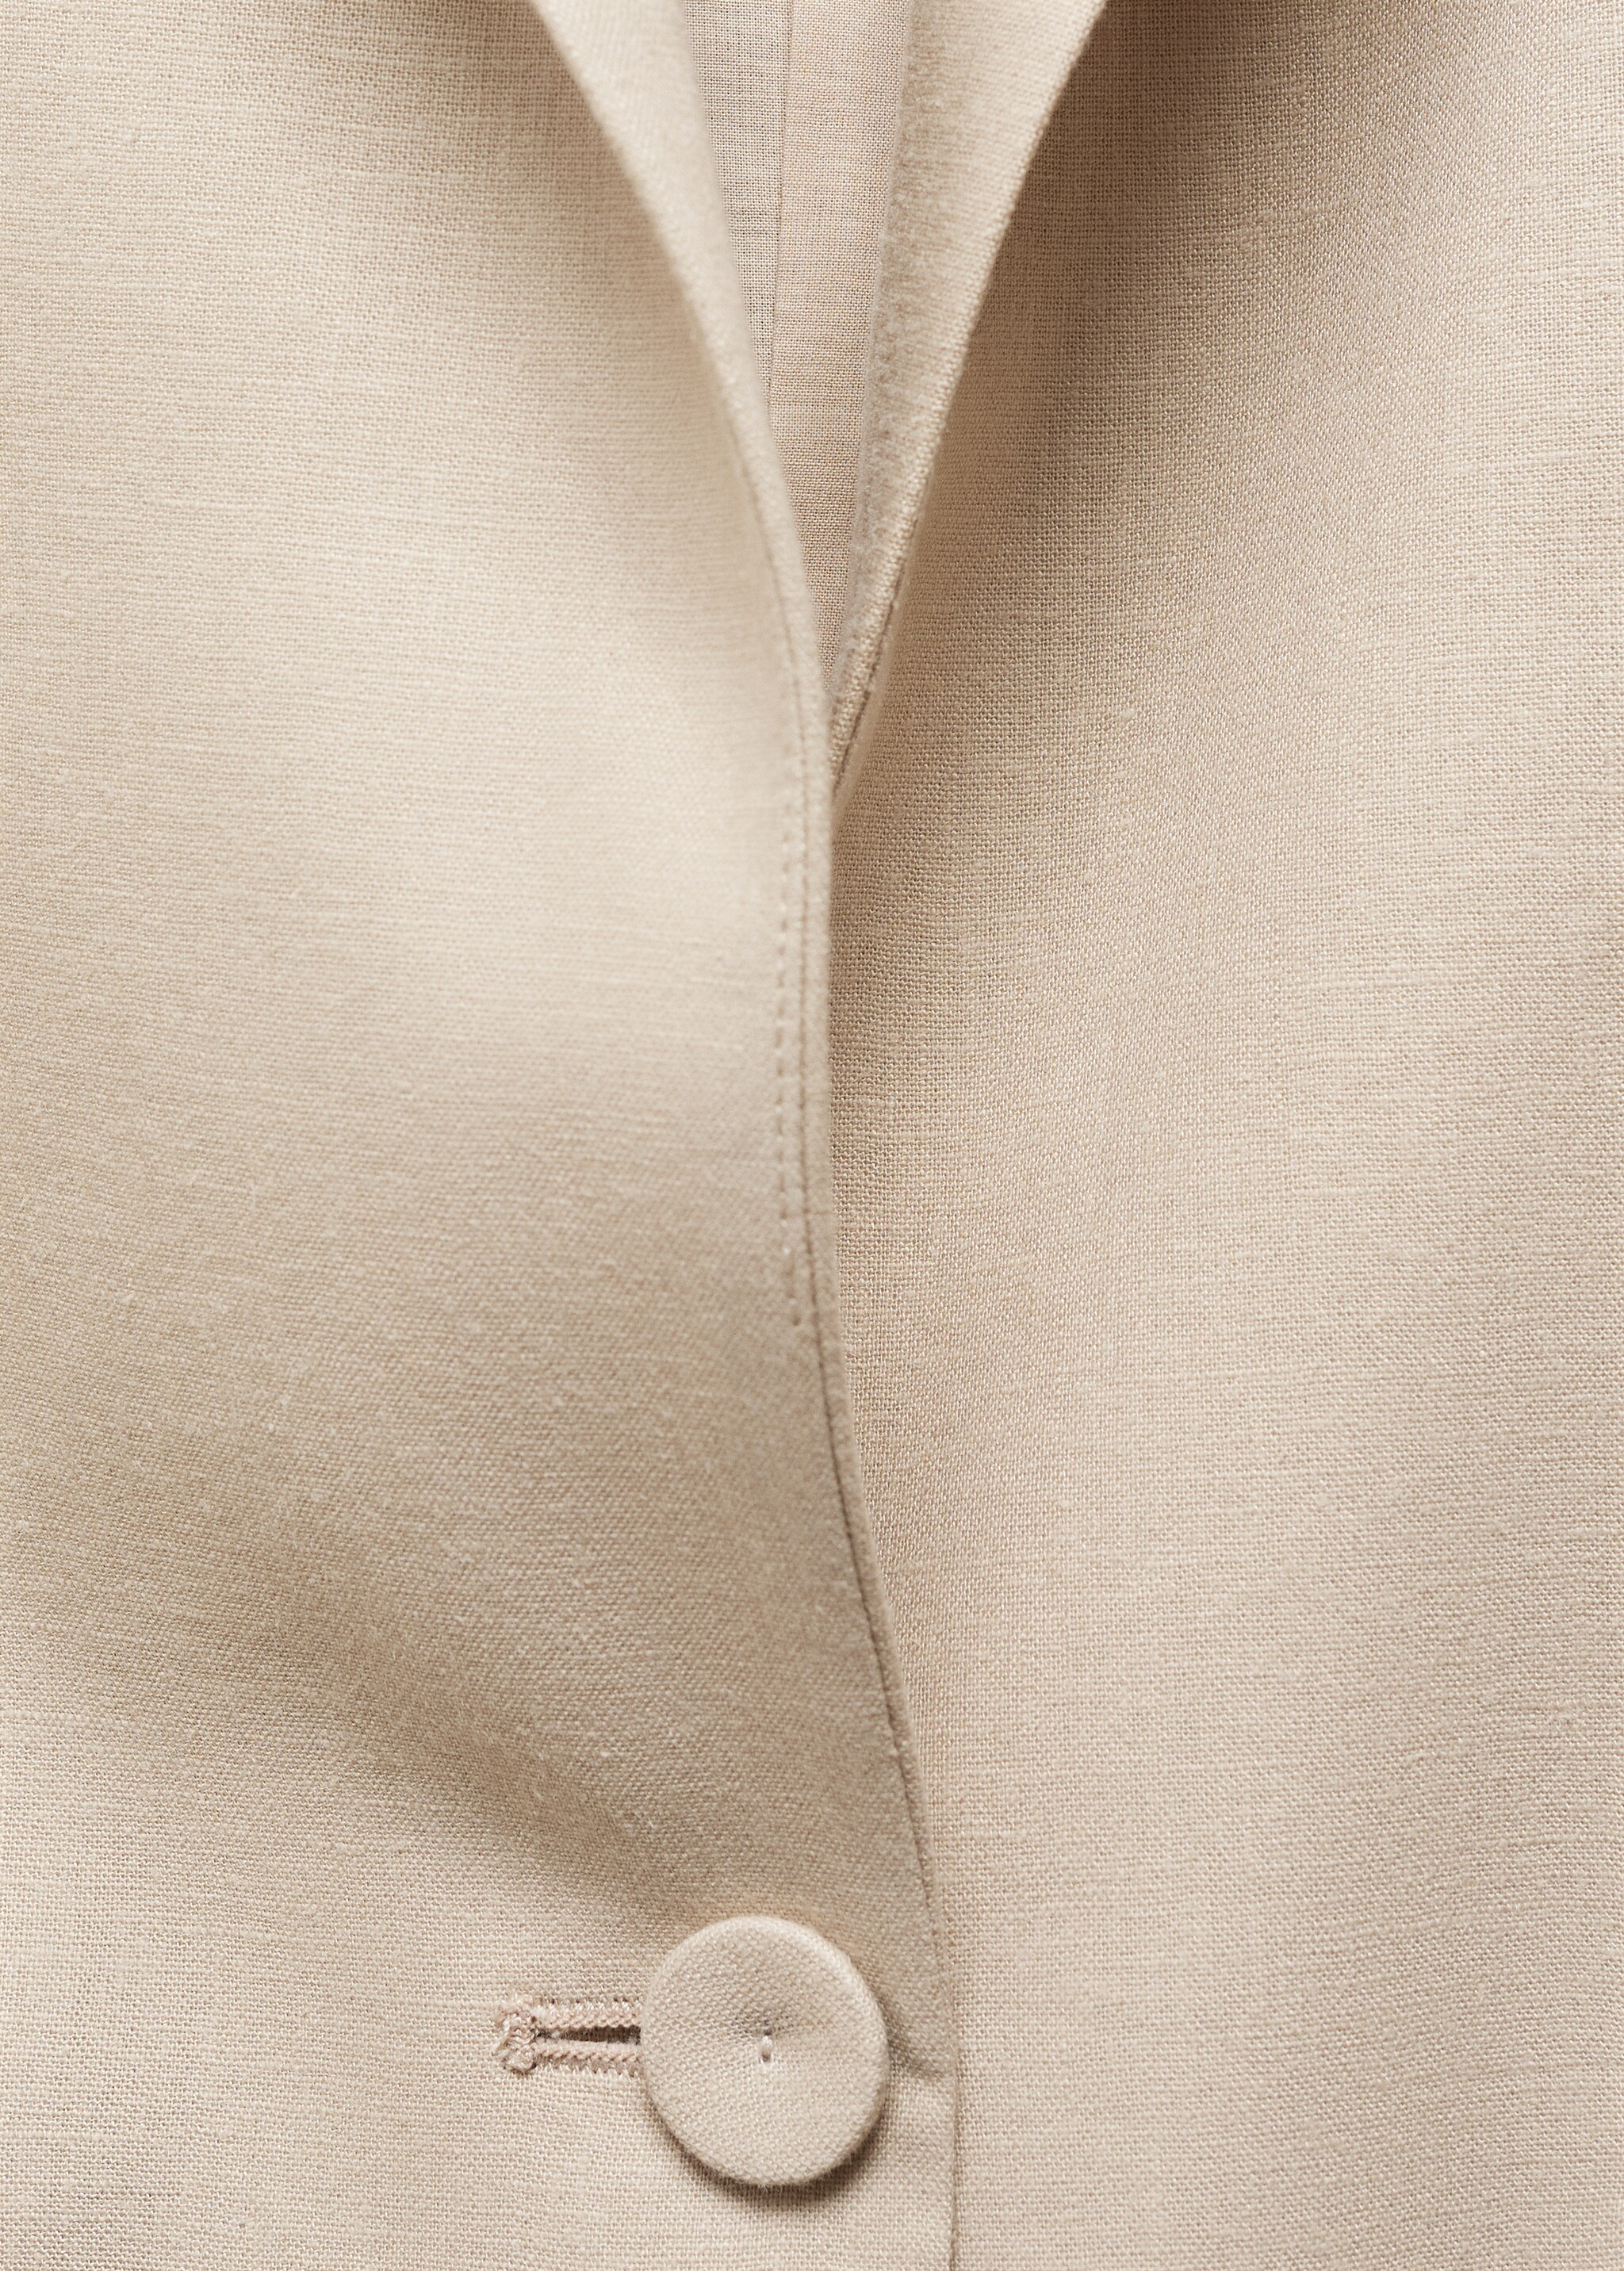 Linen jacket with buttoned cuffs - Details of the article 8